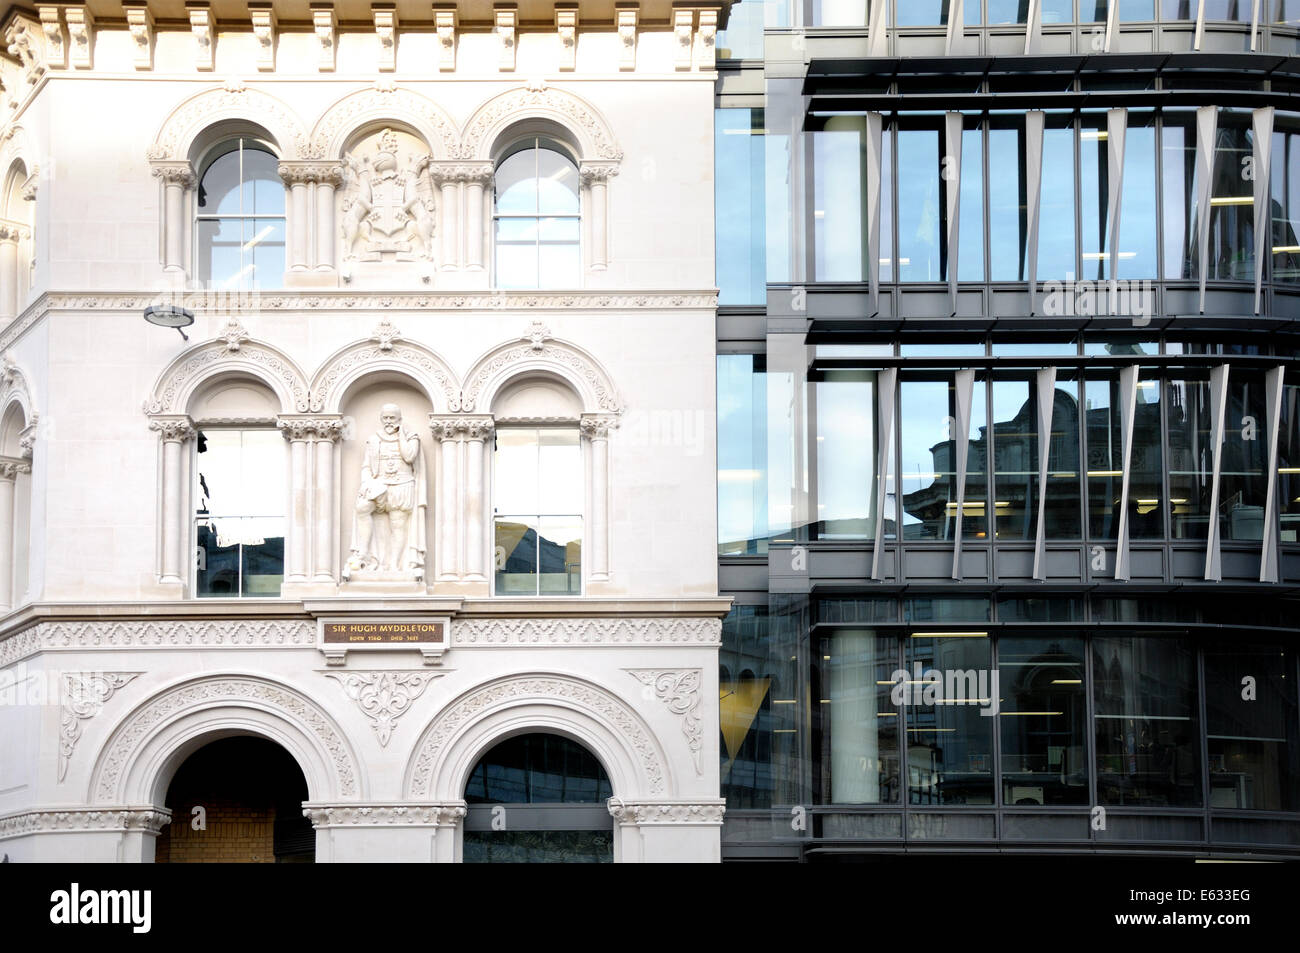 London, England, UK. Old and new architecture on Holborn Viaduct Stock Photo